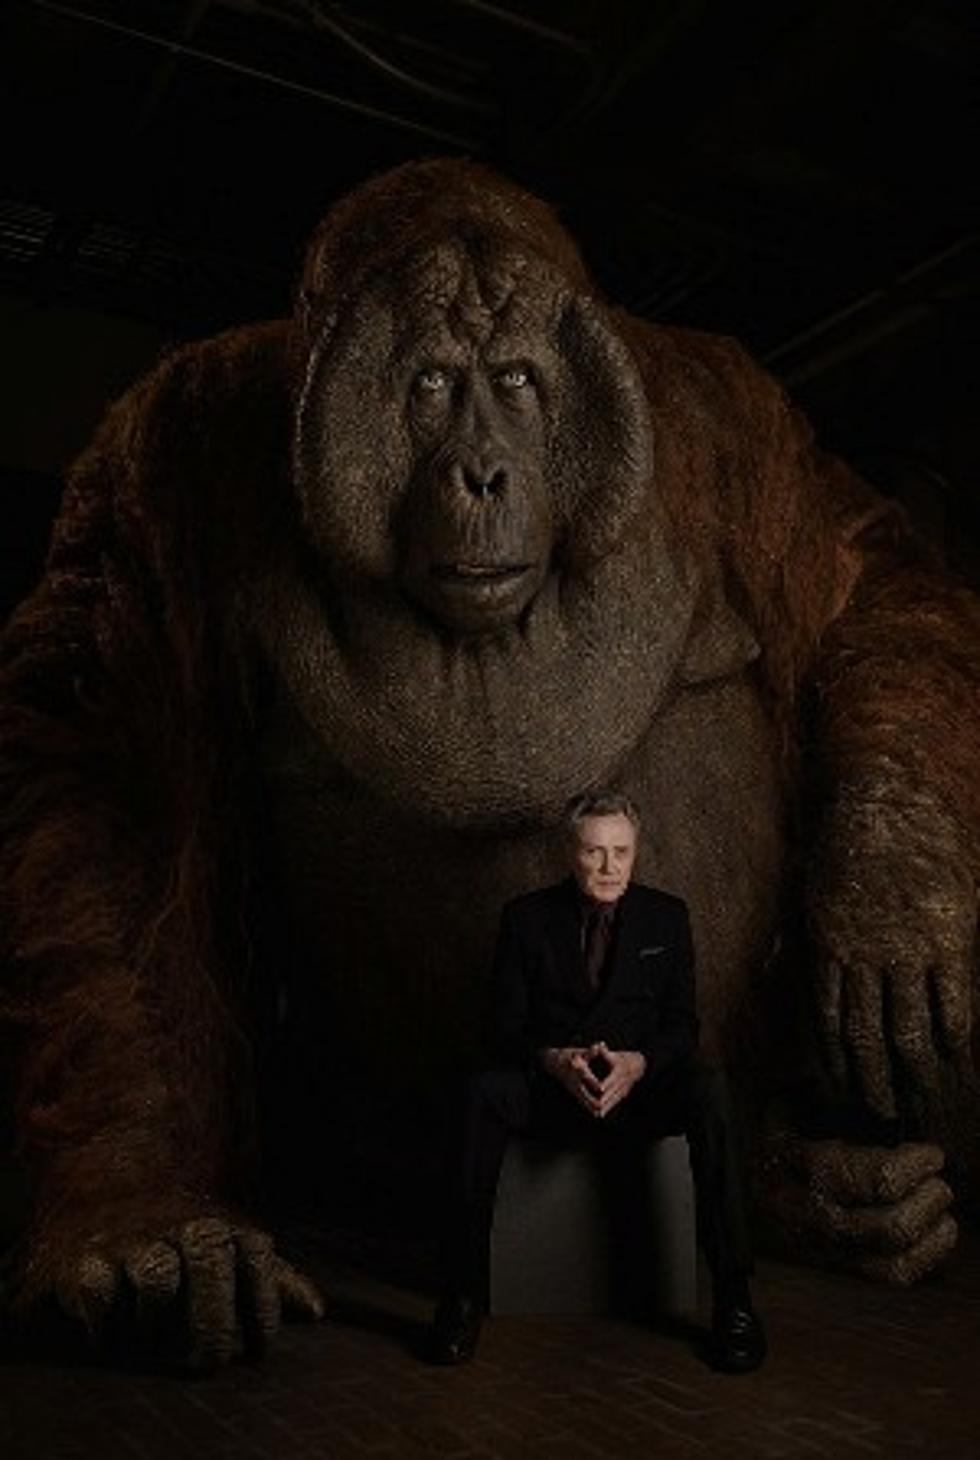 ‘Jungle Book’ Easter Egg Ties Saturday Night Live Sketch To ‘King Louie’ Played By Christopher Walken